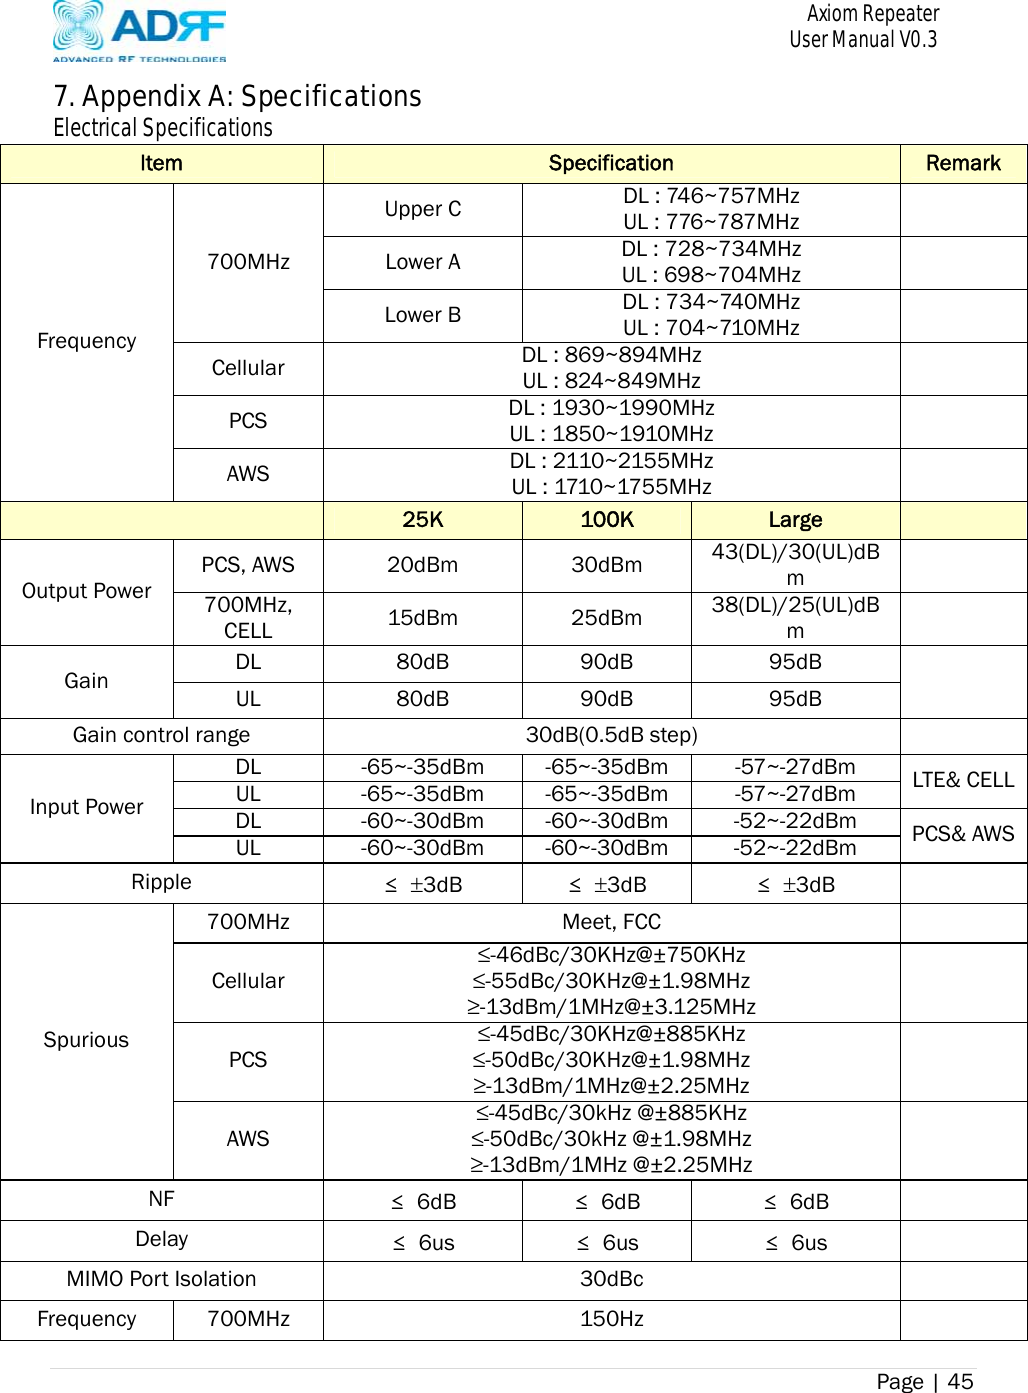       Axiom Repeater     User Manual V0.3 Page | 45    7. Appendix A: Specifications Electrical Specifications Item  Specification  Remark Frequency 700MHz Upper C  DL : 746~757MHz UL : 776~787MHz   Lower A  DL : 728~734MHz UL : 698~704MHz   Lower B  DL : 734~740MHz UL : 704~710MHz   Cellular  DL : 869~894MHzUL : 824~849MHz   PCS  DL : 1930~1990MHzUL : 1850~1910MHz   AWS  DL : 2110~2155MHzUL : 1710~1755MHz    25K  100K  Large   Output Power PCS, AWS  20dBm  30dBm  43(DL)/30(UL)dBm   700MHz, CELL  15dBm 25dBm 38(DL)/25(UL)dBm   Gain  DL 80dB 90dB 95dB   UL 80dB 90dB 95dB Gain control range  30dB(0.5dB step)   Input Power DL -65~-35dBm -65~-35dBm -57~-27dBm LTE&amp; CELLUL -65~-35dBm -65~-35dBm -57~-27dBm DL -60~-30dBm -60~-30dBm -52~-22dBm PCS&amp; AWSUL -60~-30dBm -60~-30dBm -52~-22dBm Ripple  ≤ 3dB  ≤ 3dB  ≤ 3dB   Spurious 700MHz Meet, FCC   Cellular ≤-46dBc/30KHz@±750KHz≤-55dBc/30KHz@±1.98MHz ≥-13dBm/1MHz@±3.125MHz  PCS ≤-45dBc/30KHz@±885KHz≤-50dBc/30KHz@±1.98MHz ≥-13dBm/1MHz@±2.25MHz  AWS ≤-45dBc/30kHz @±885KHz≤-50dBc/30kHz @±1.98MHz ≥-13dBm/1MHz @±2.25MHz  NF  ≤ 6dB  ≤ 6dB  ≤ 6dB   Delay  ≤ 6us  ≤ 6us  ≤ 6us   MIMO Port Isolation  30dBc   Frequency 700MHz  150Hz   